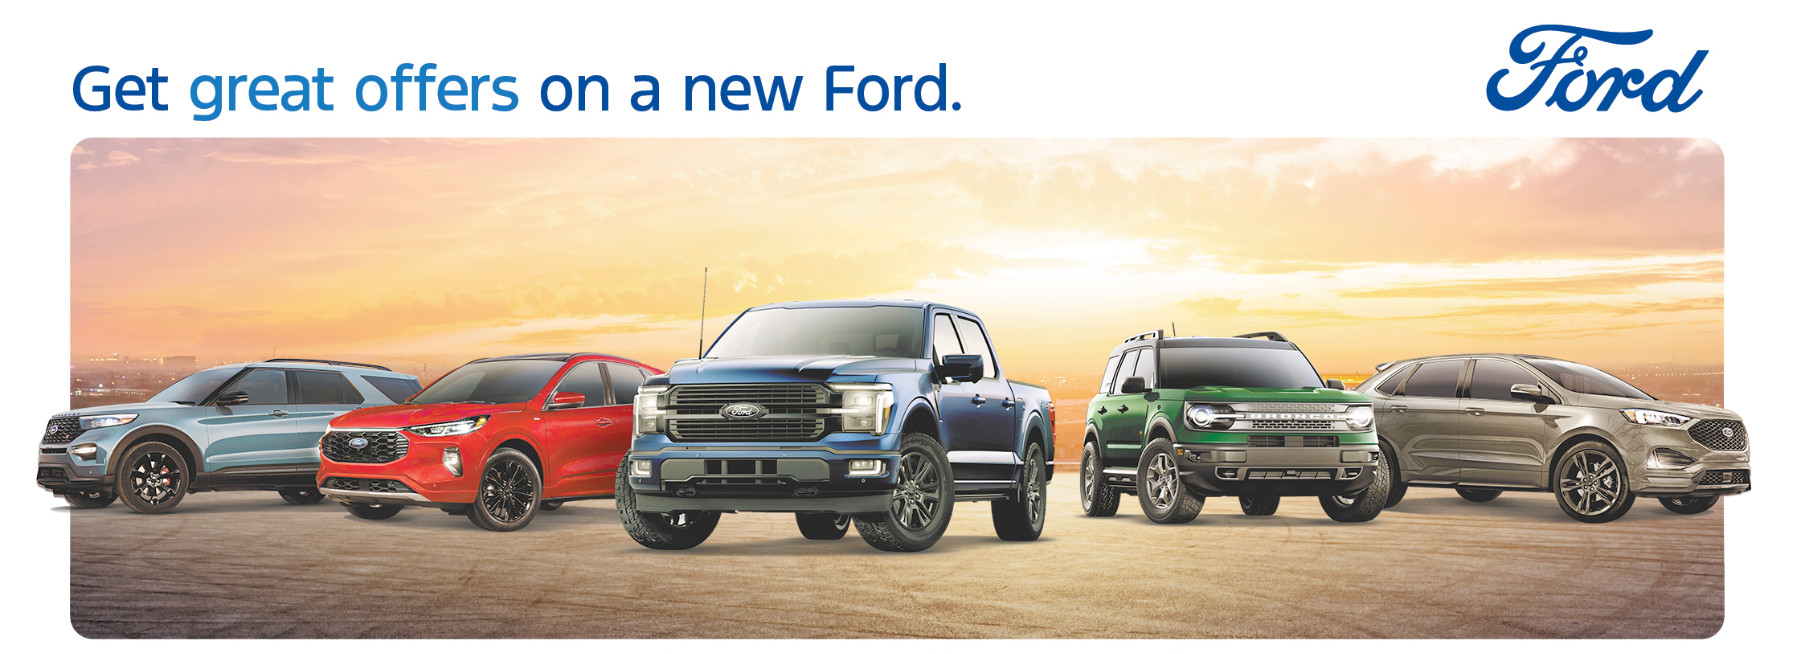 get great offers on new ford